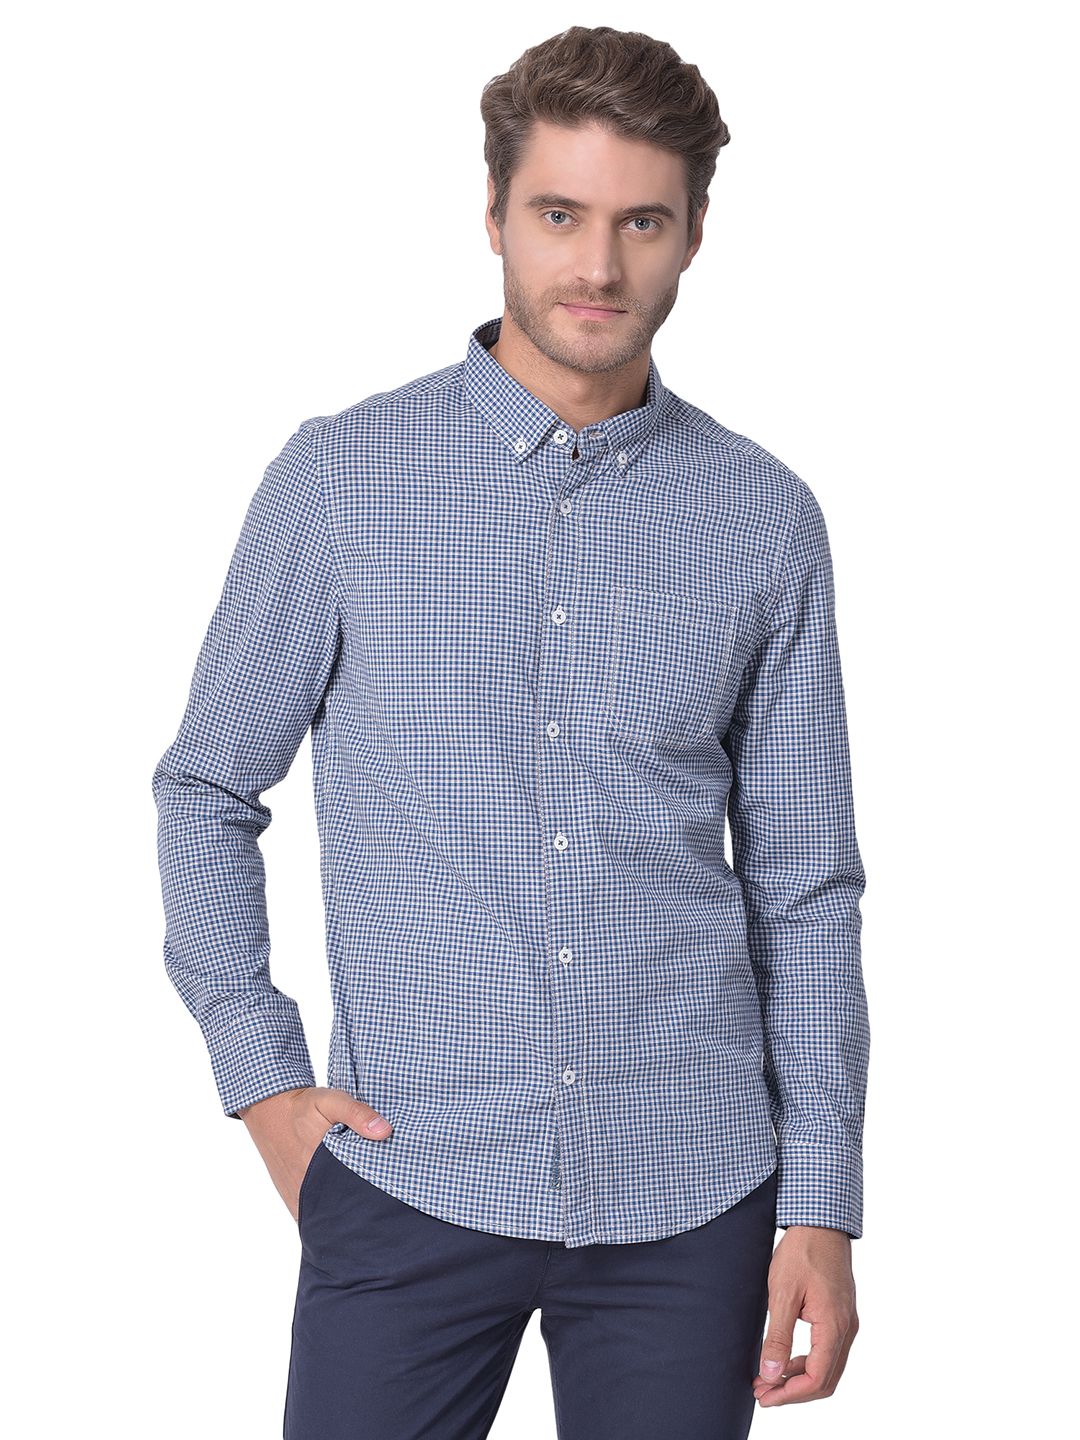 Blue and white check shirt for men